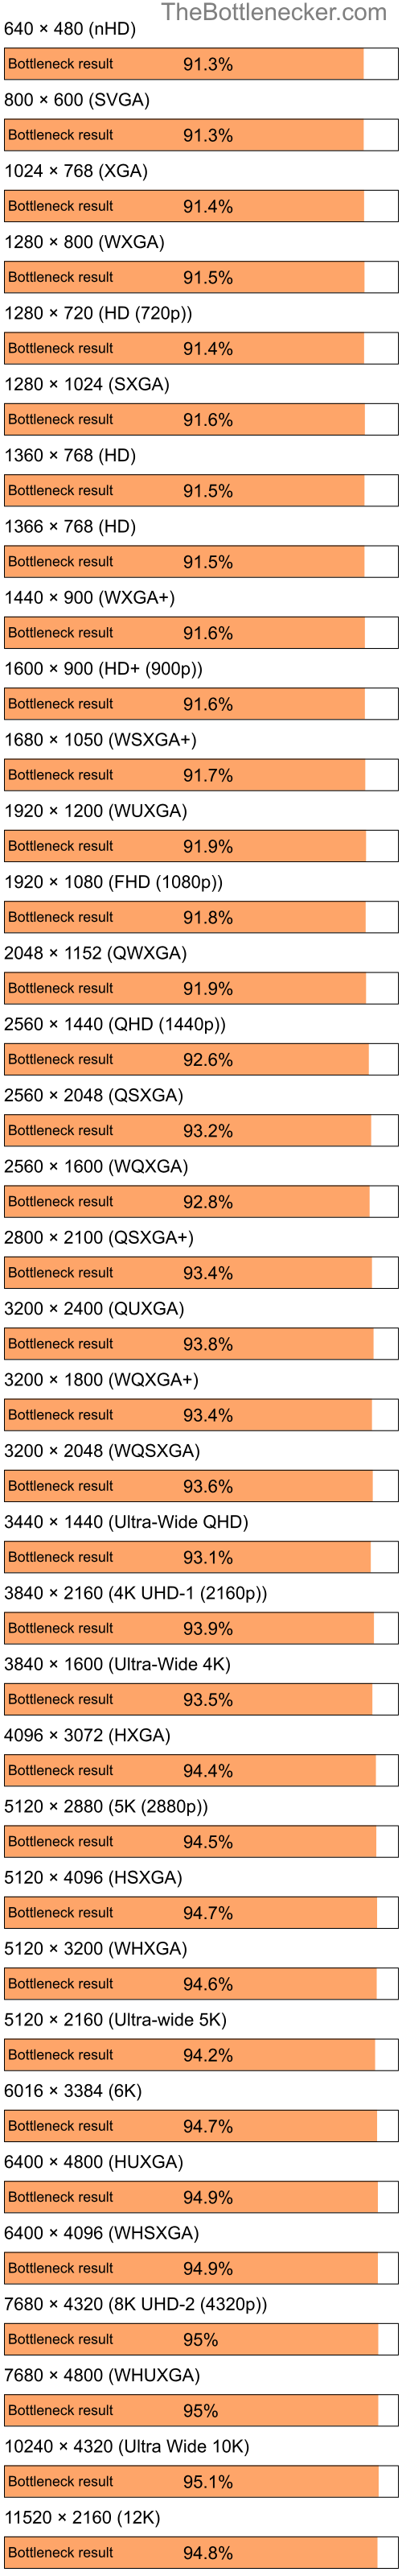 Bottleneck results by resolution for Intel Pentium 4 and NVIDIA GeForce2 Pro in Graphic Card Intense Tasks